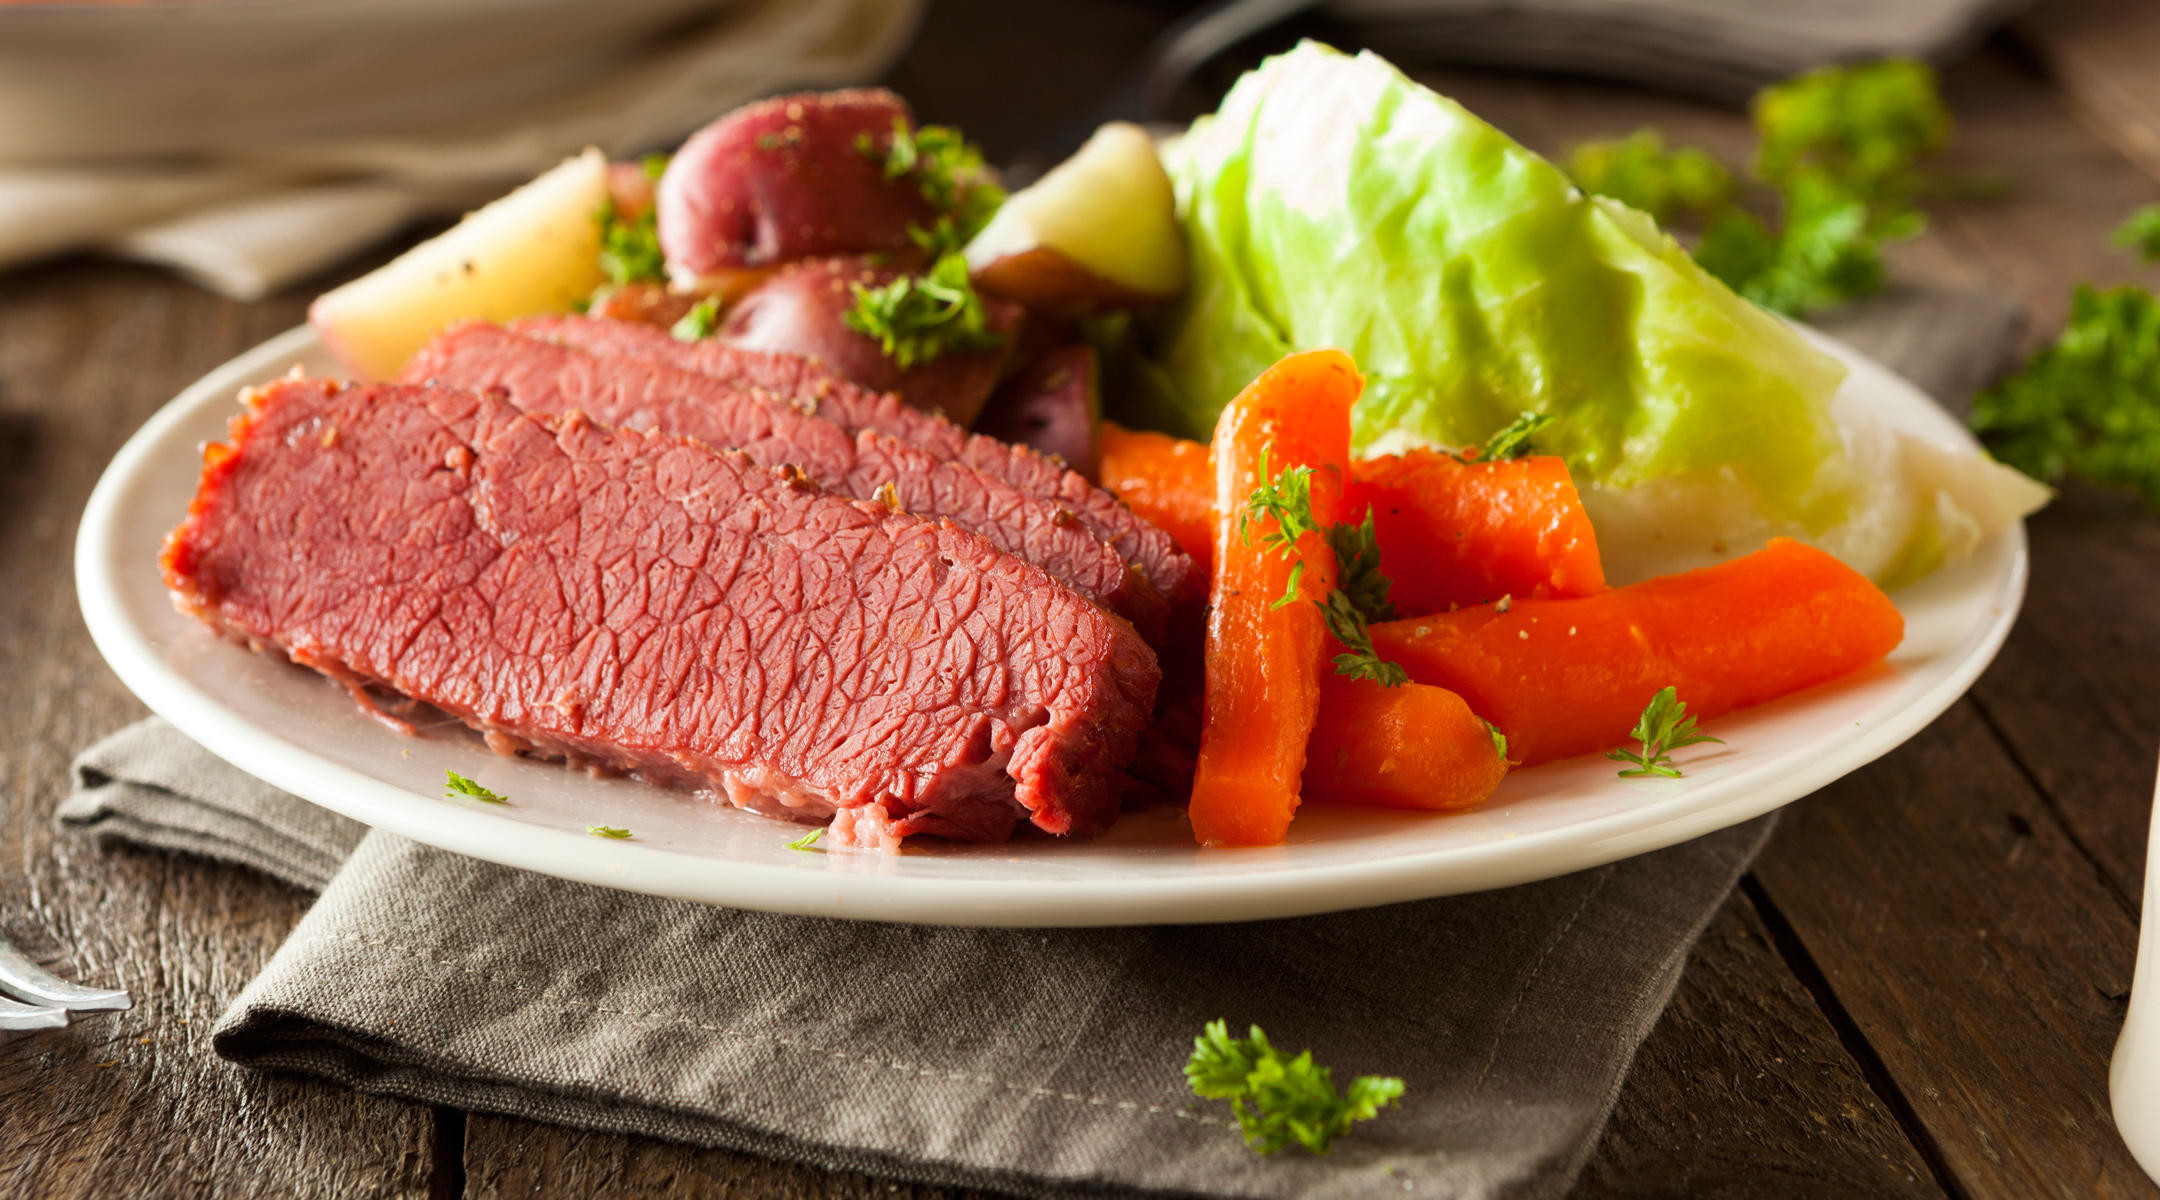 St Patrick Day Corned Beef And Cabbage
 For Dinner Tonight Corned Beef and Cabbage to Celebrate